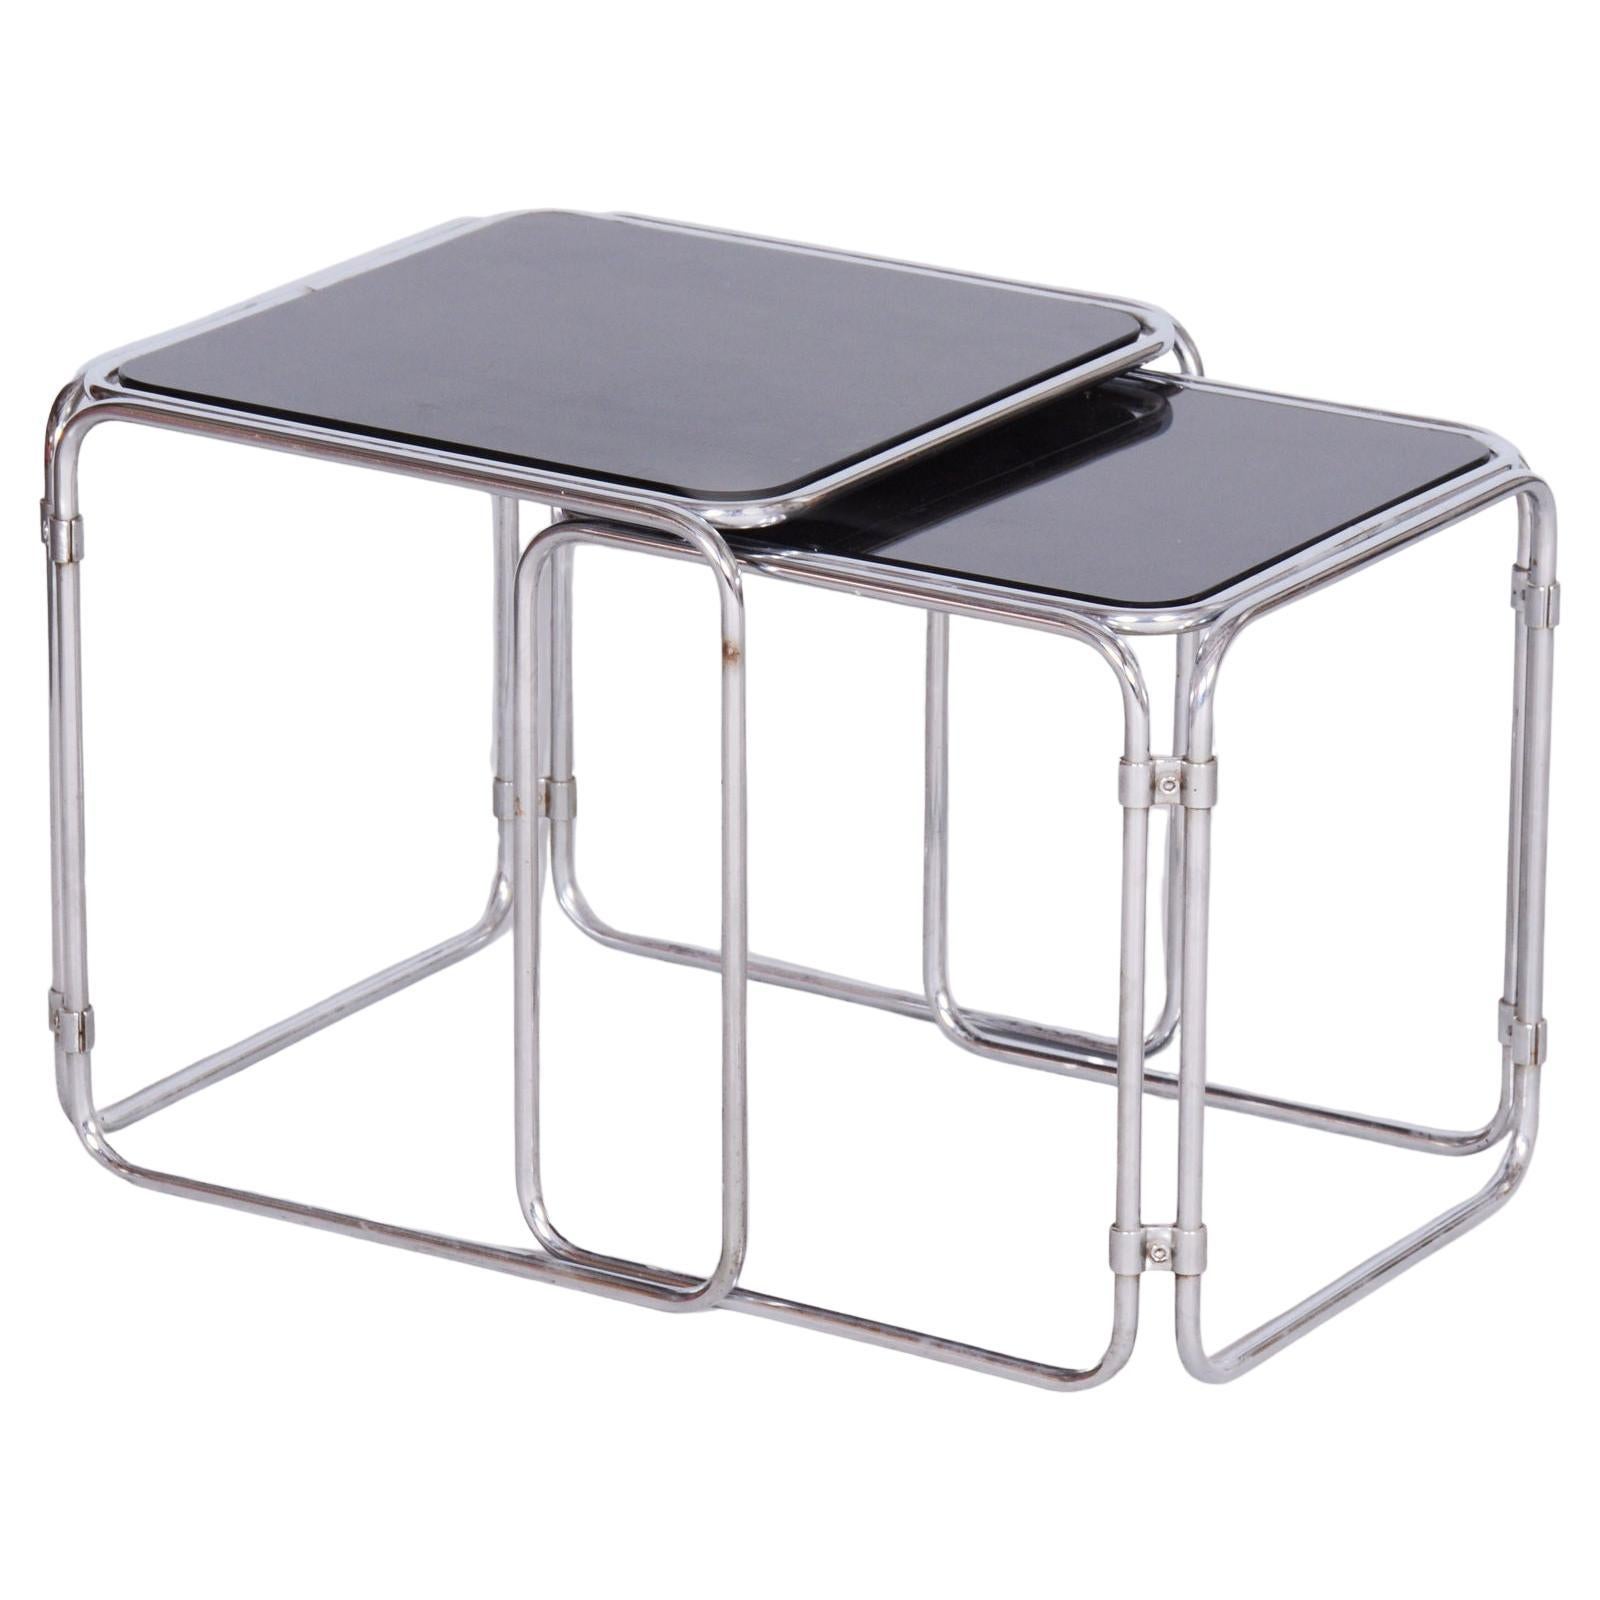 Restored Midcentury Nesting Tables, Chrome-Plated Steel, Glass, Czechia, 1960s For Sale